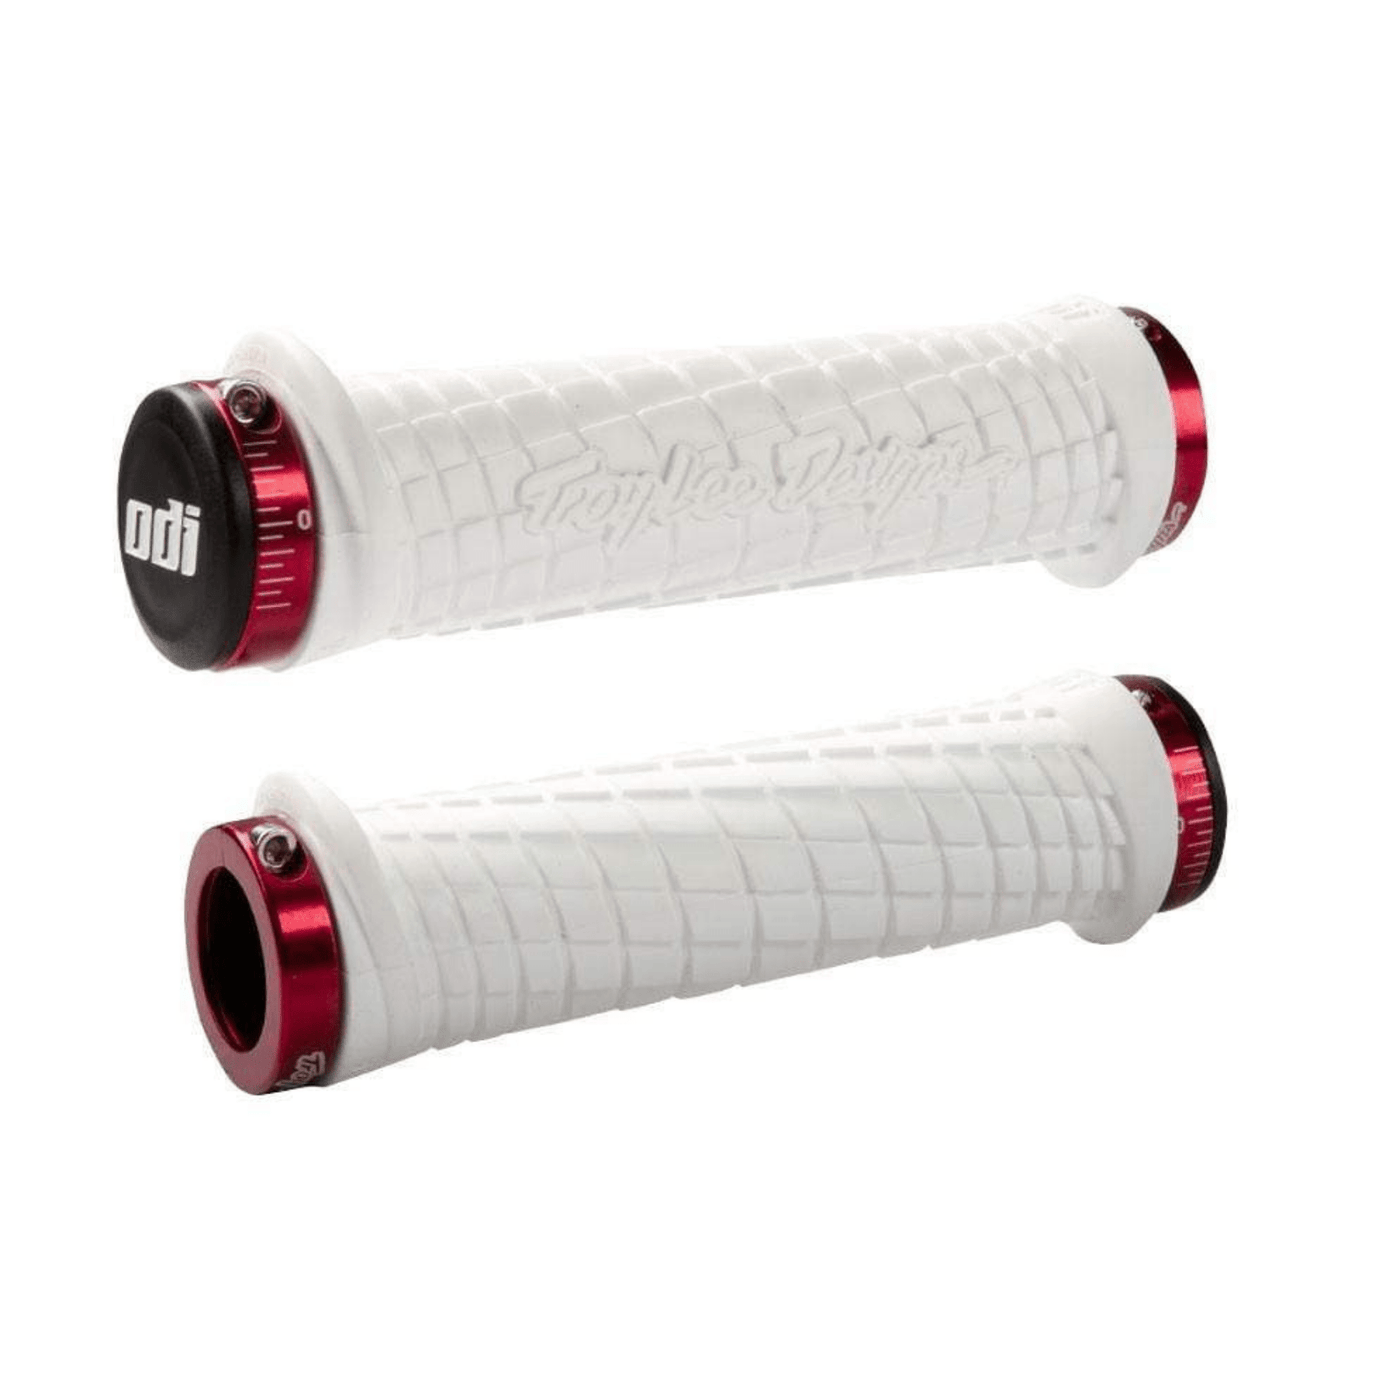 ODI TLD NO Flange Lock On Grips 130mm 8Lines Shop - Fast Shipping